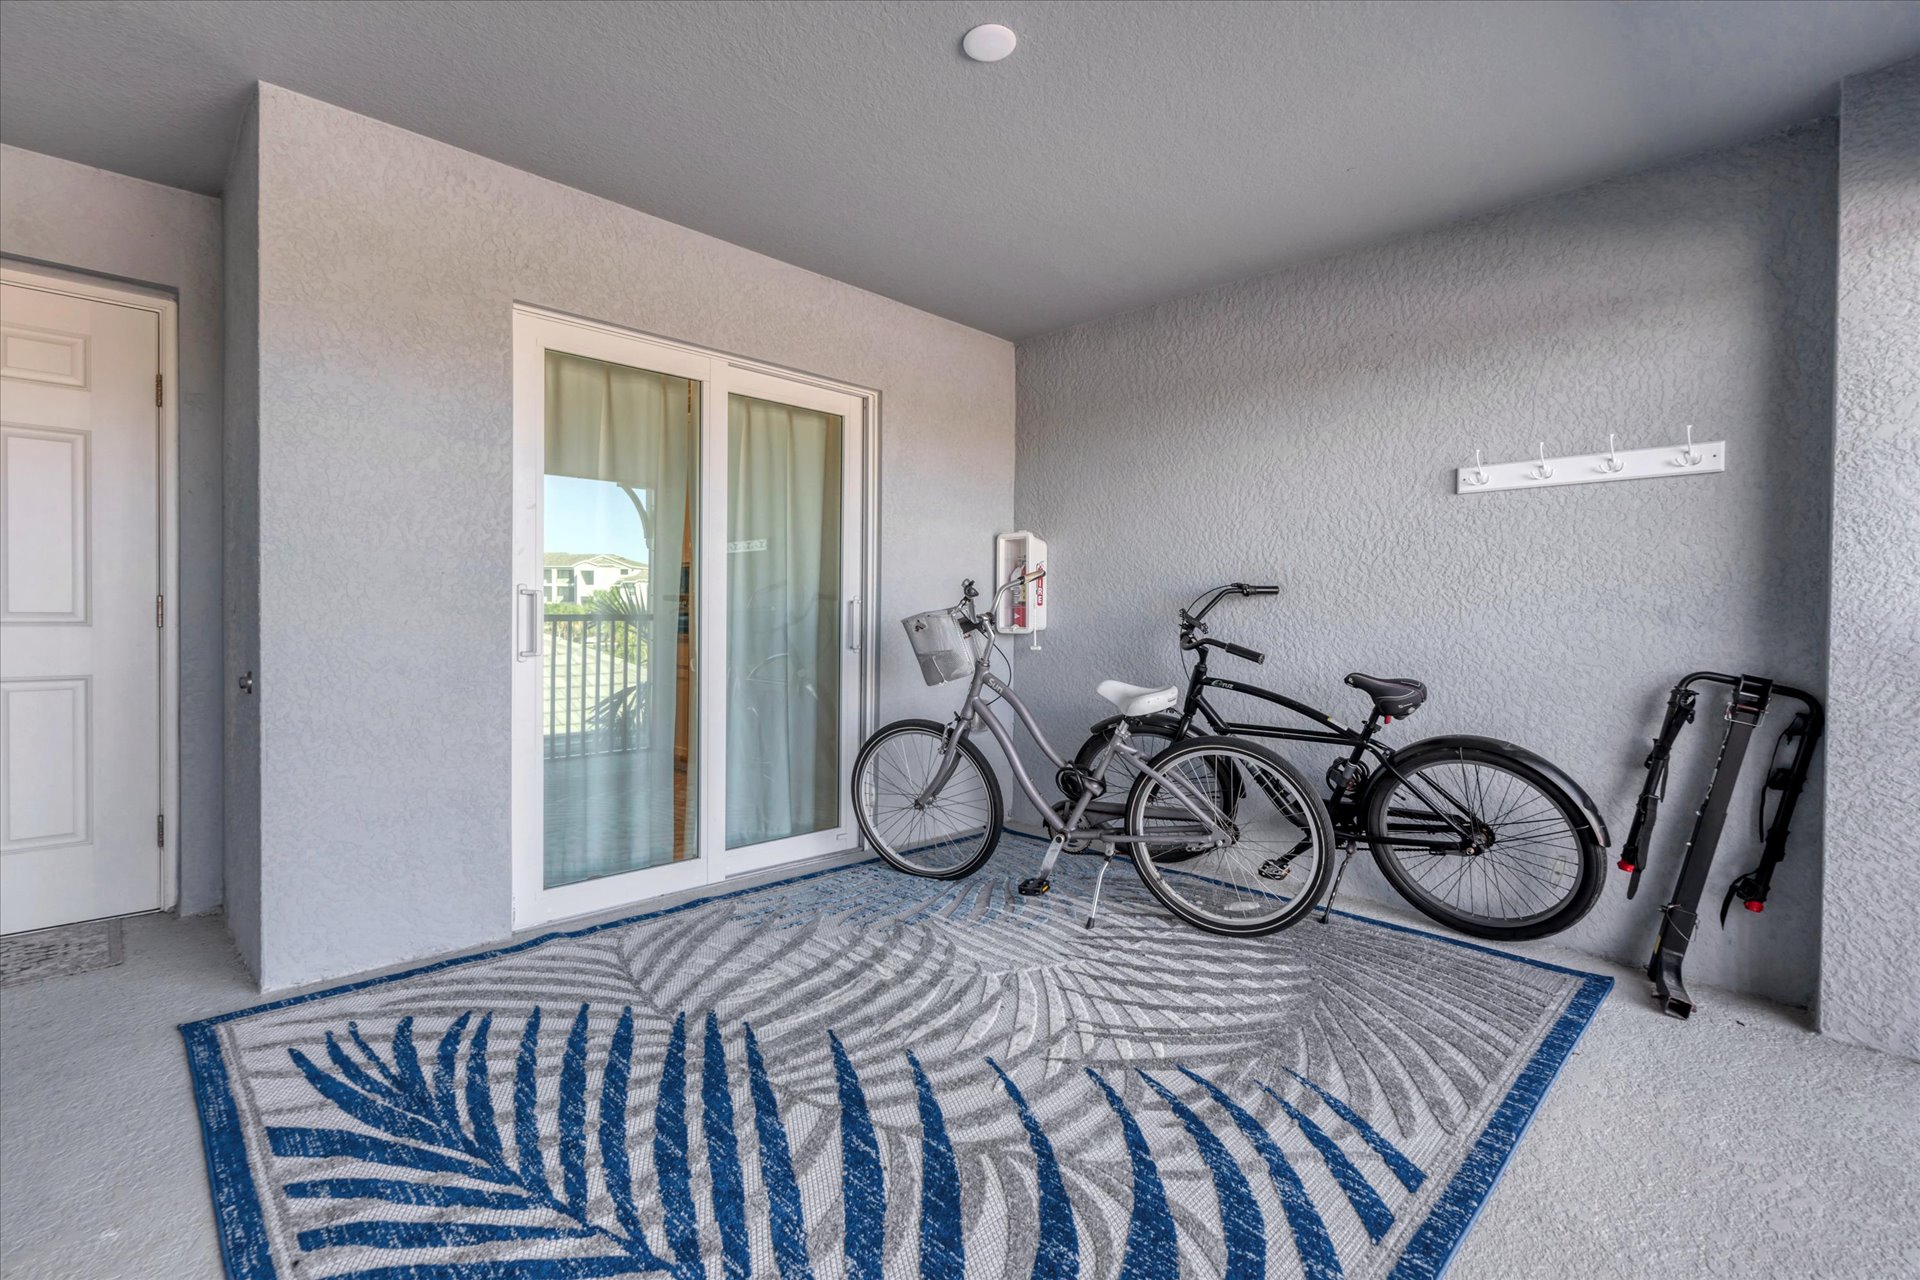 2 Bikes for guest use